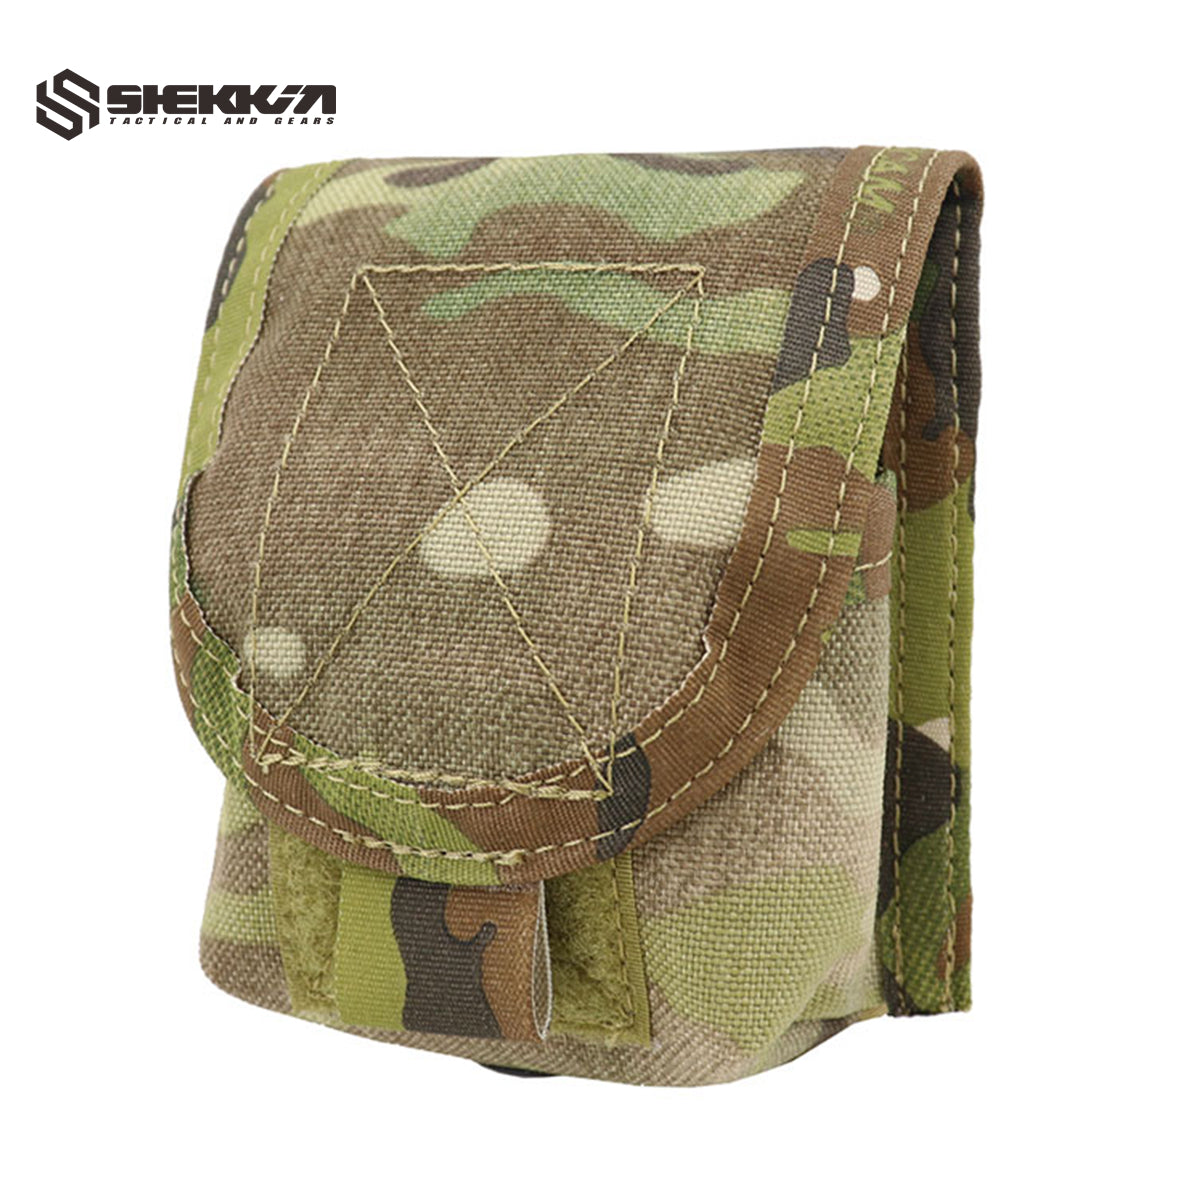 Multicam Paraclete style Frag Pouch - Shekkin Gears